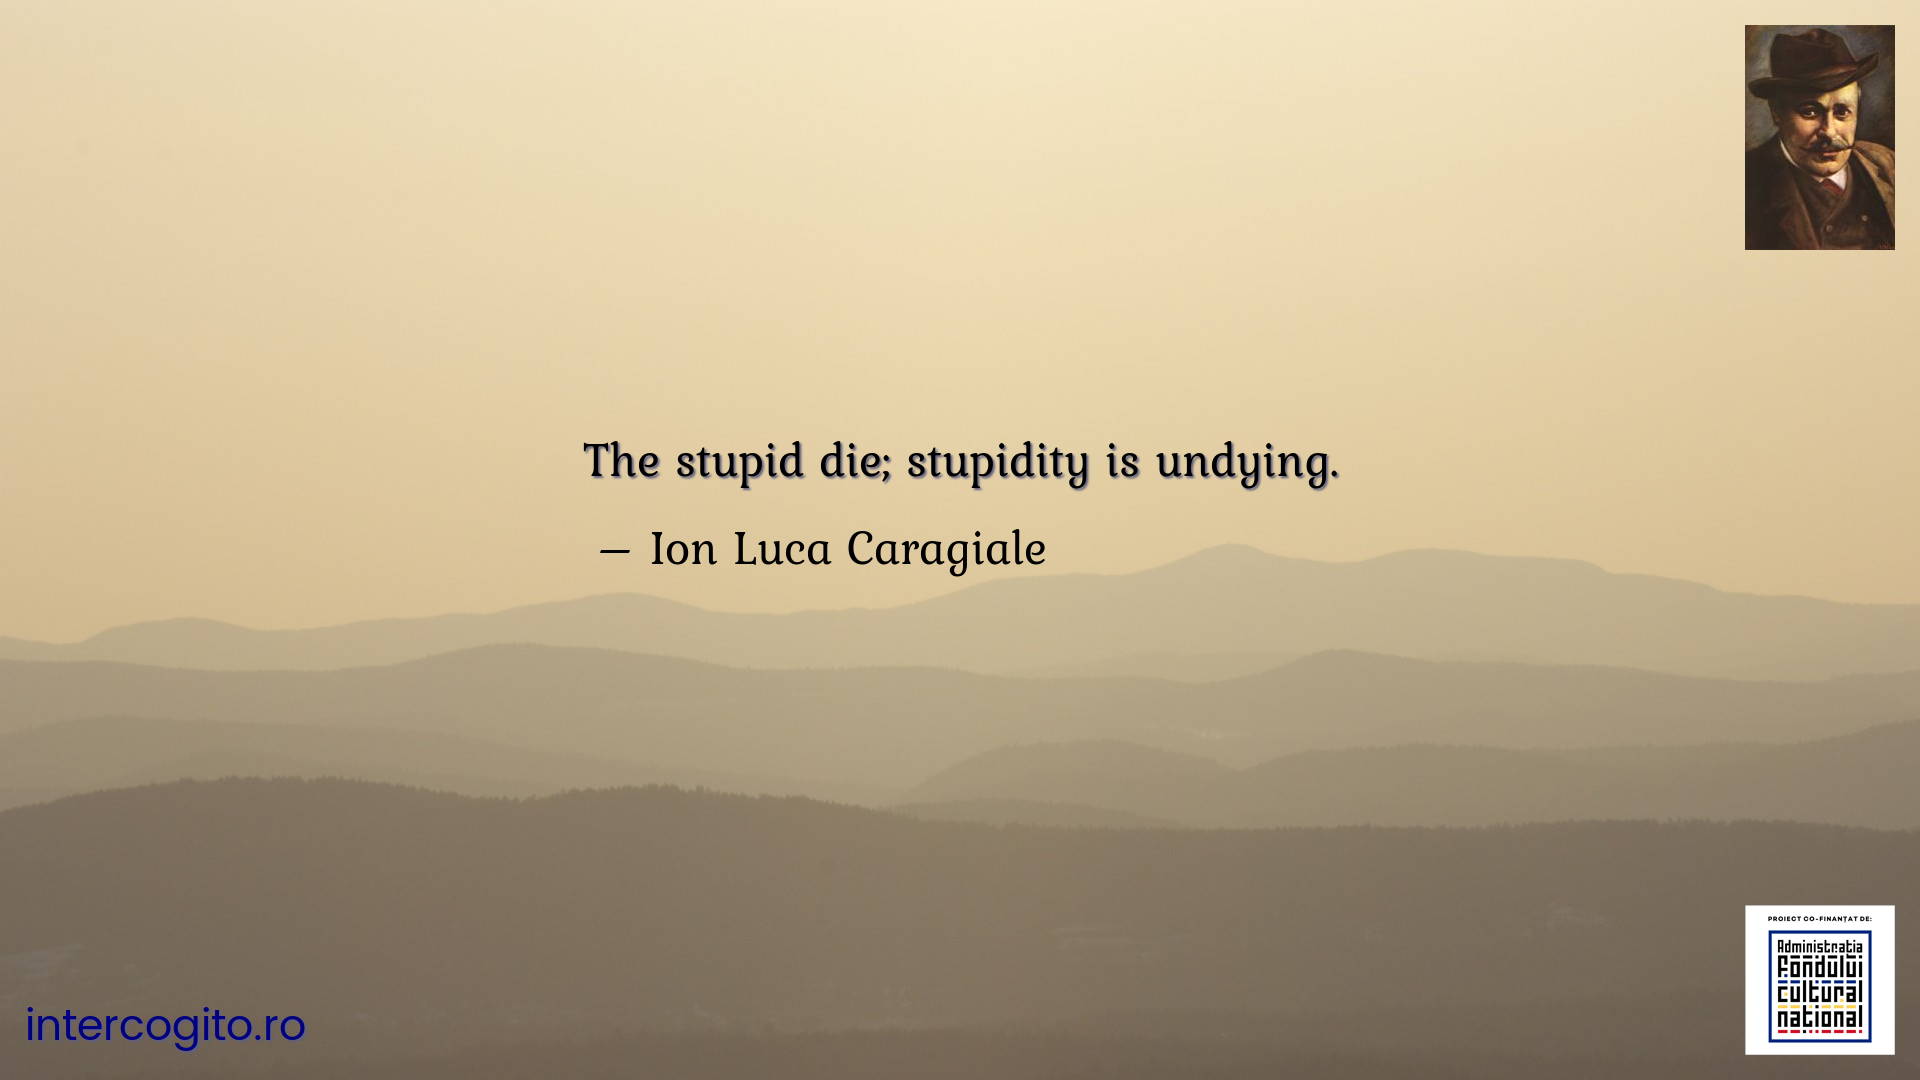 The stupid die; stupidity is undying.